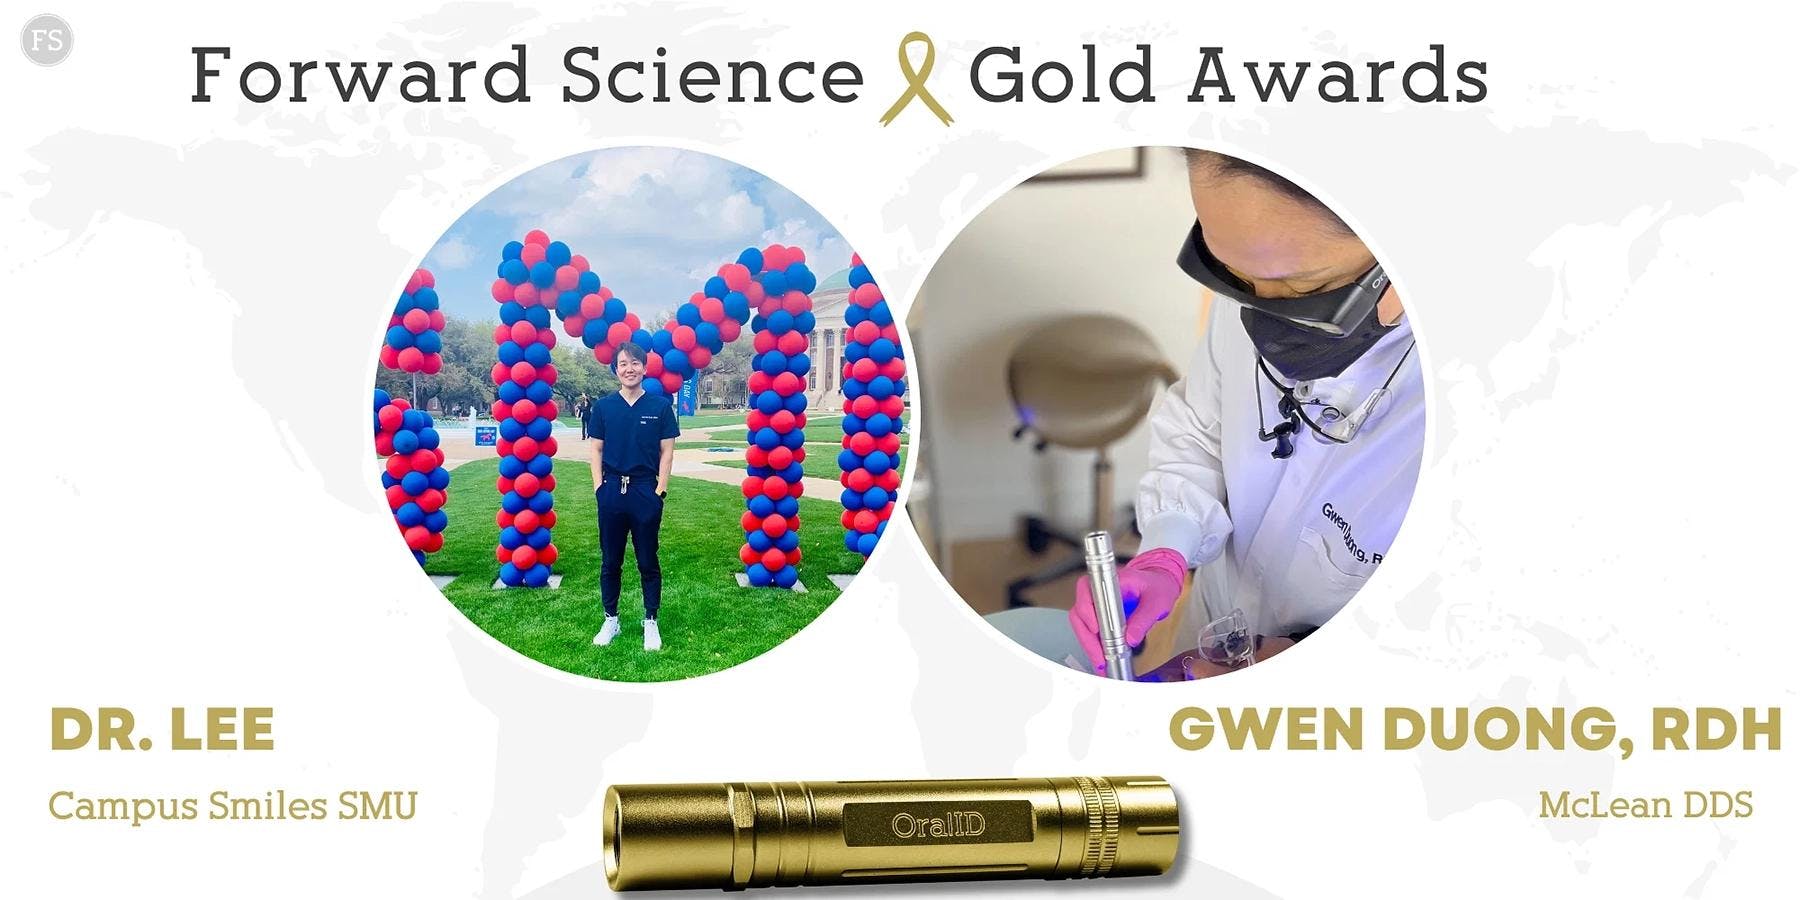 Dentist, Hygienist Honored for Excellence in Oral Cancer Screening with OralID | Image Credit: © Forward Science